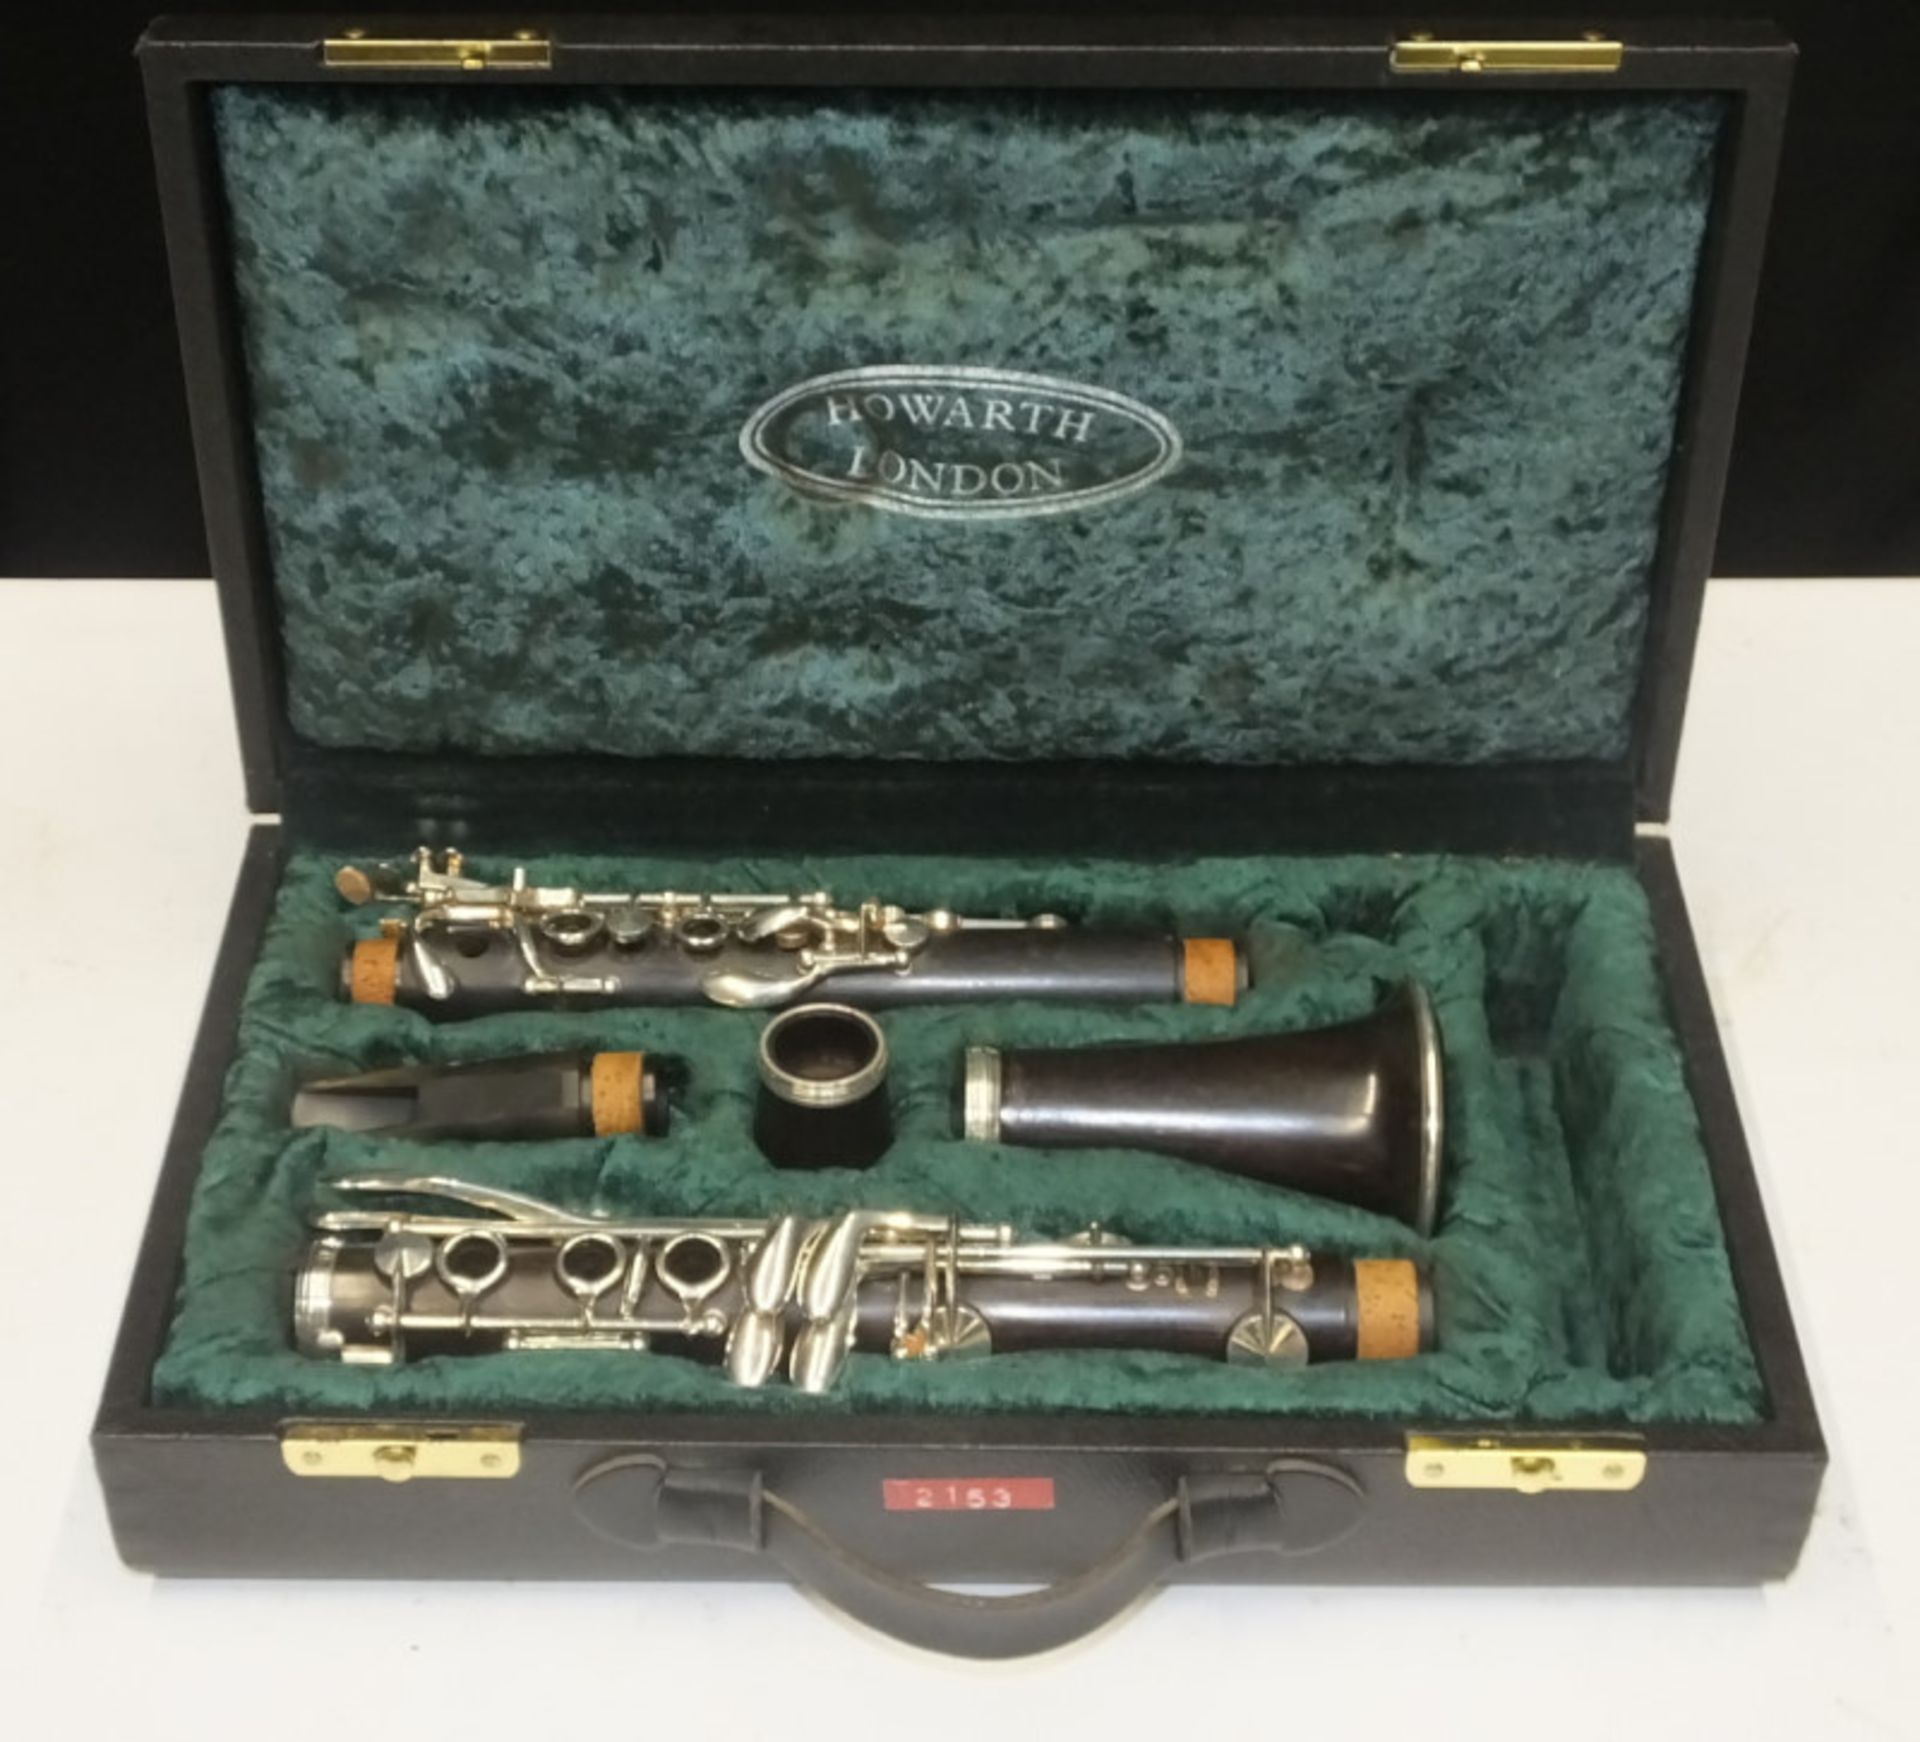 Howarth S2 Clarinet in case - Serial Number - 2153.